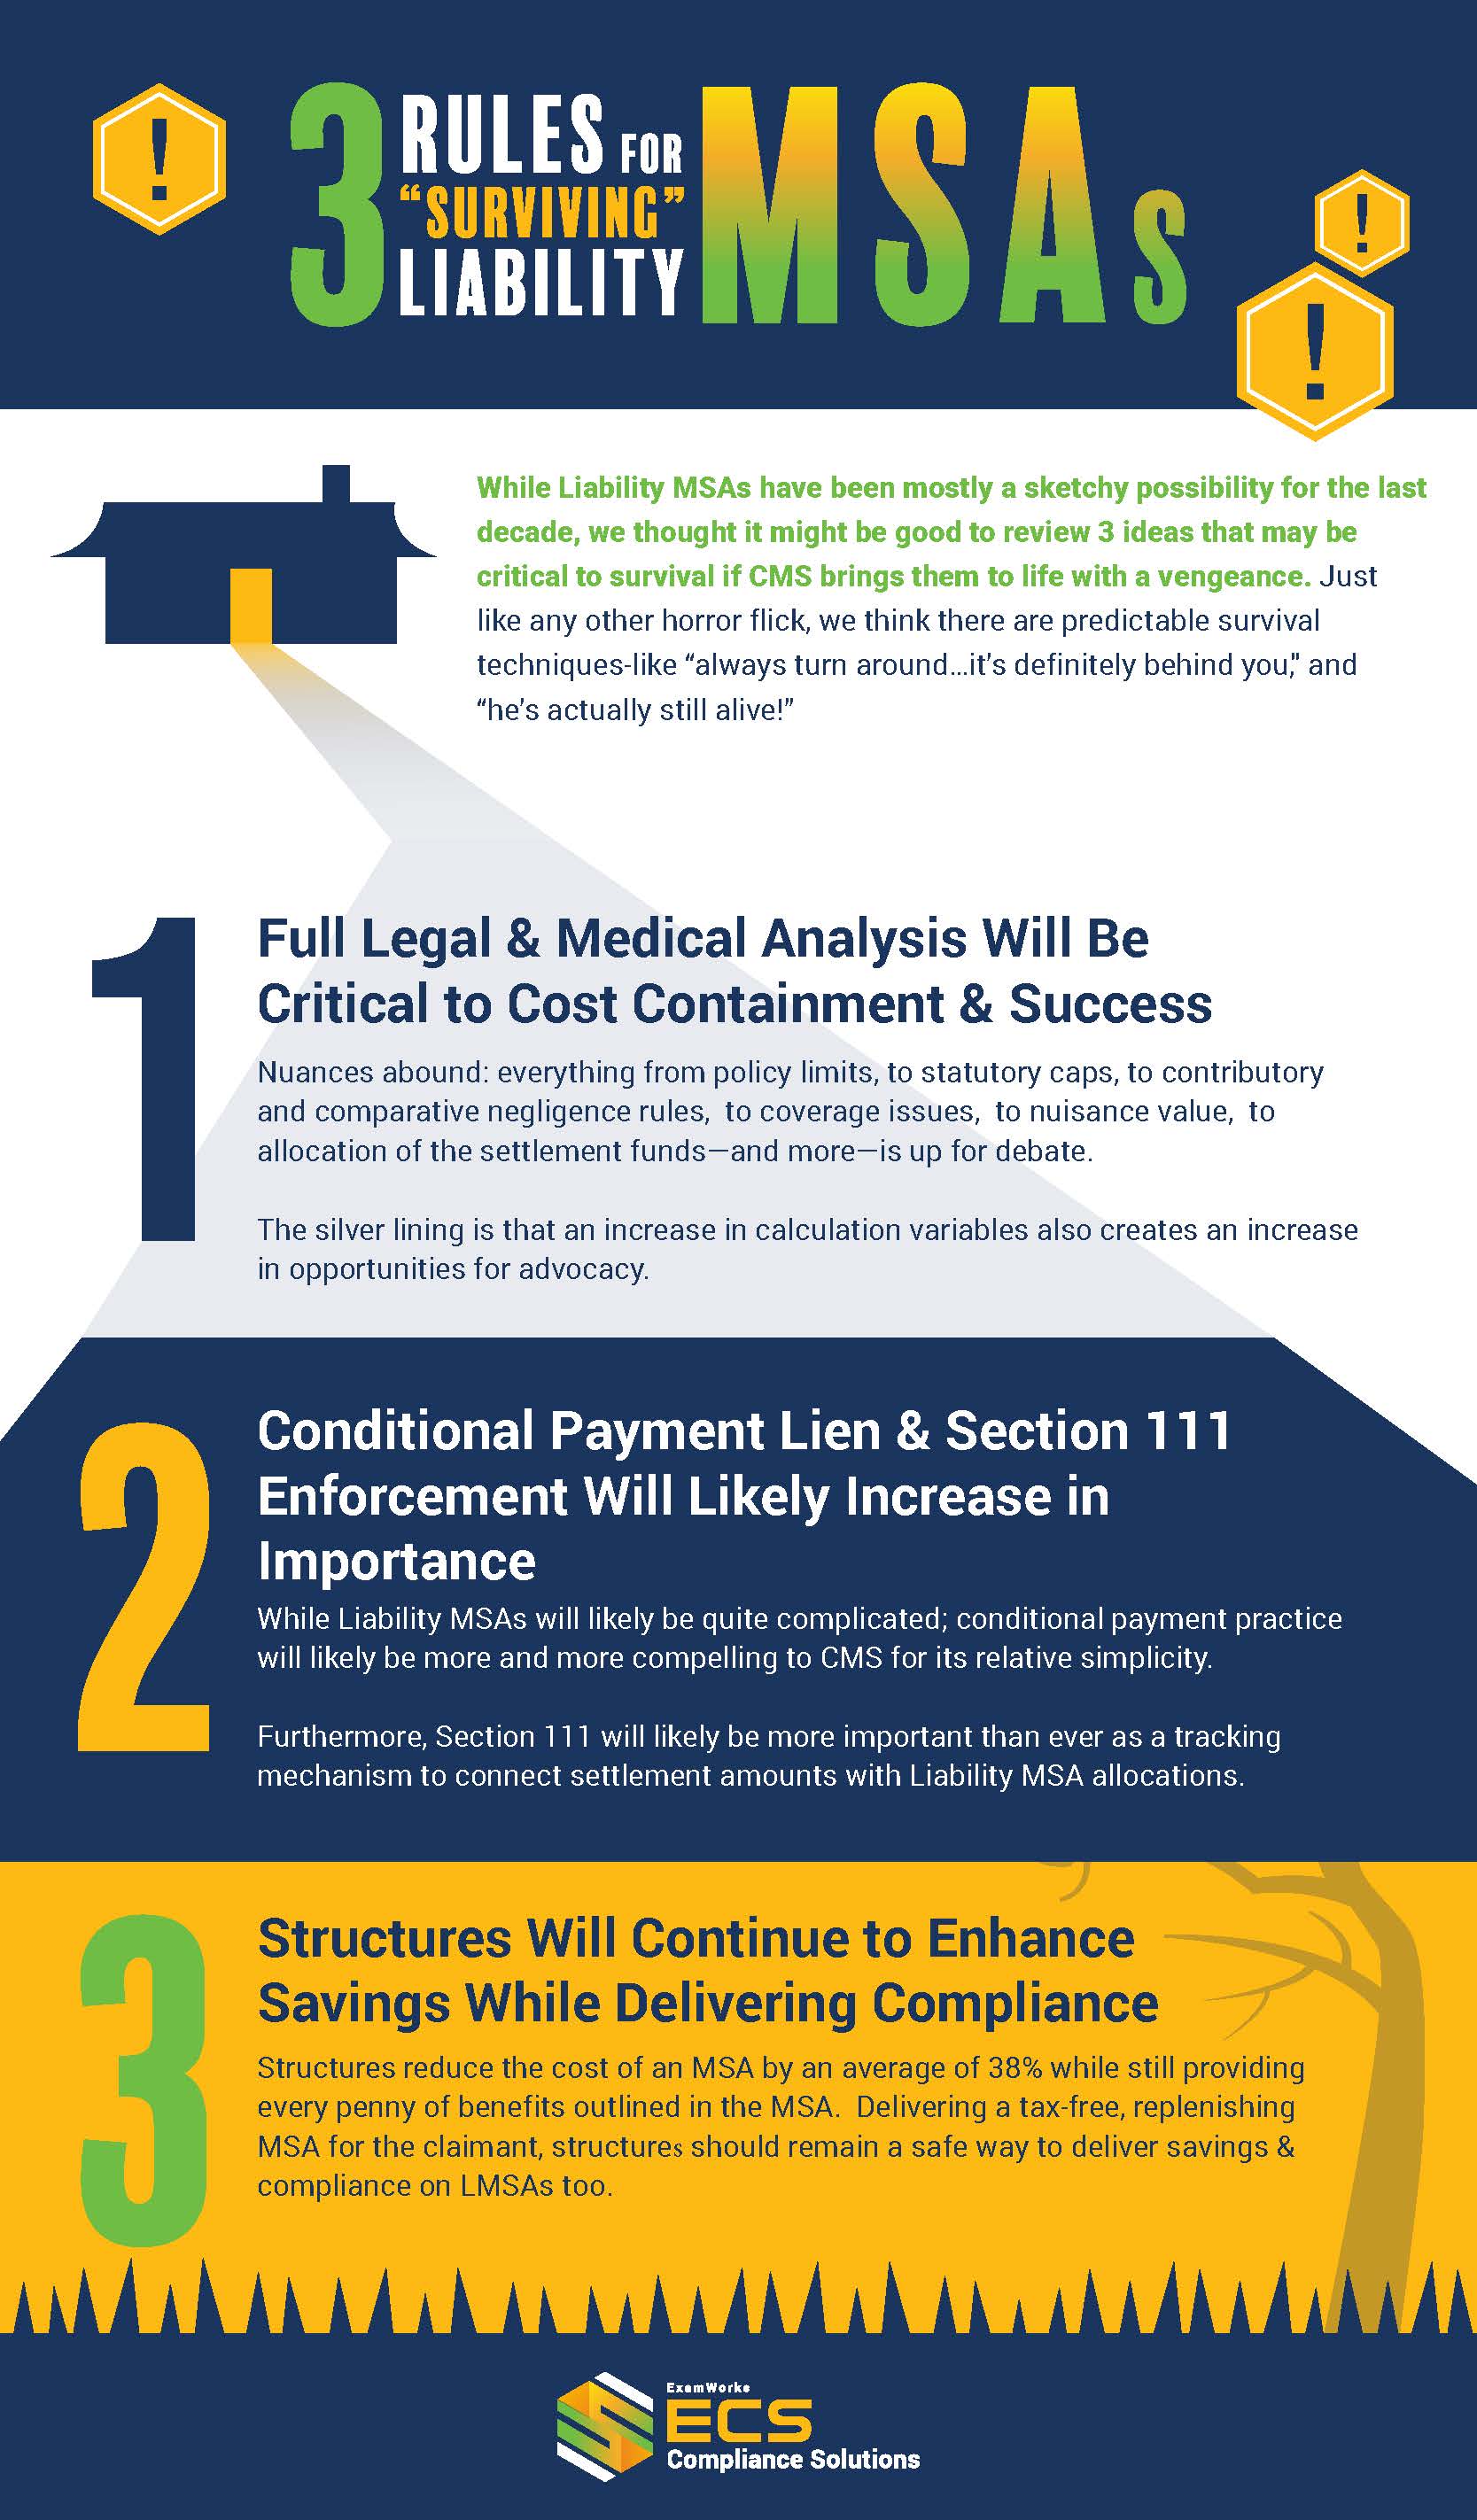 ECS - INFOGRAPHIC - Three Rules to Survive LMSAs_final